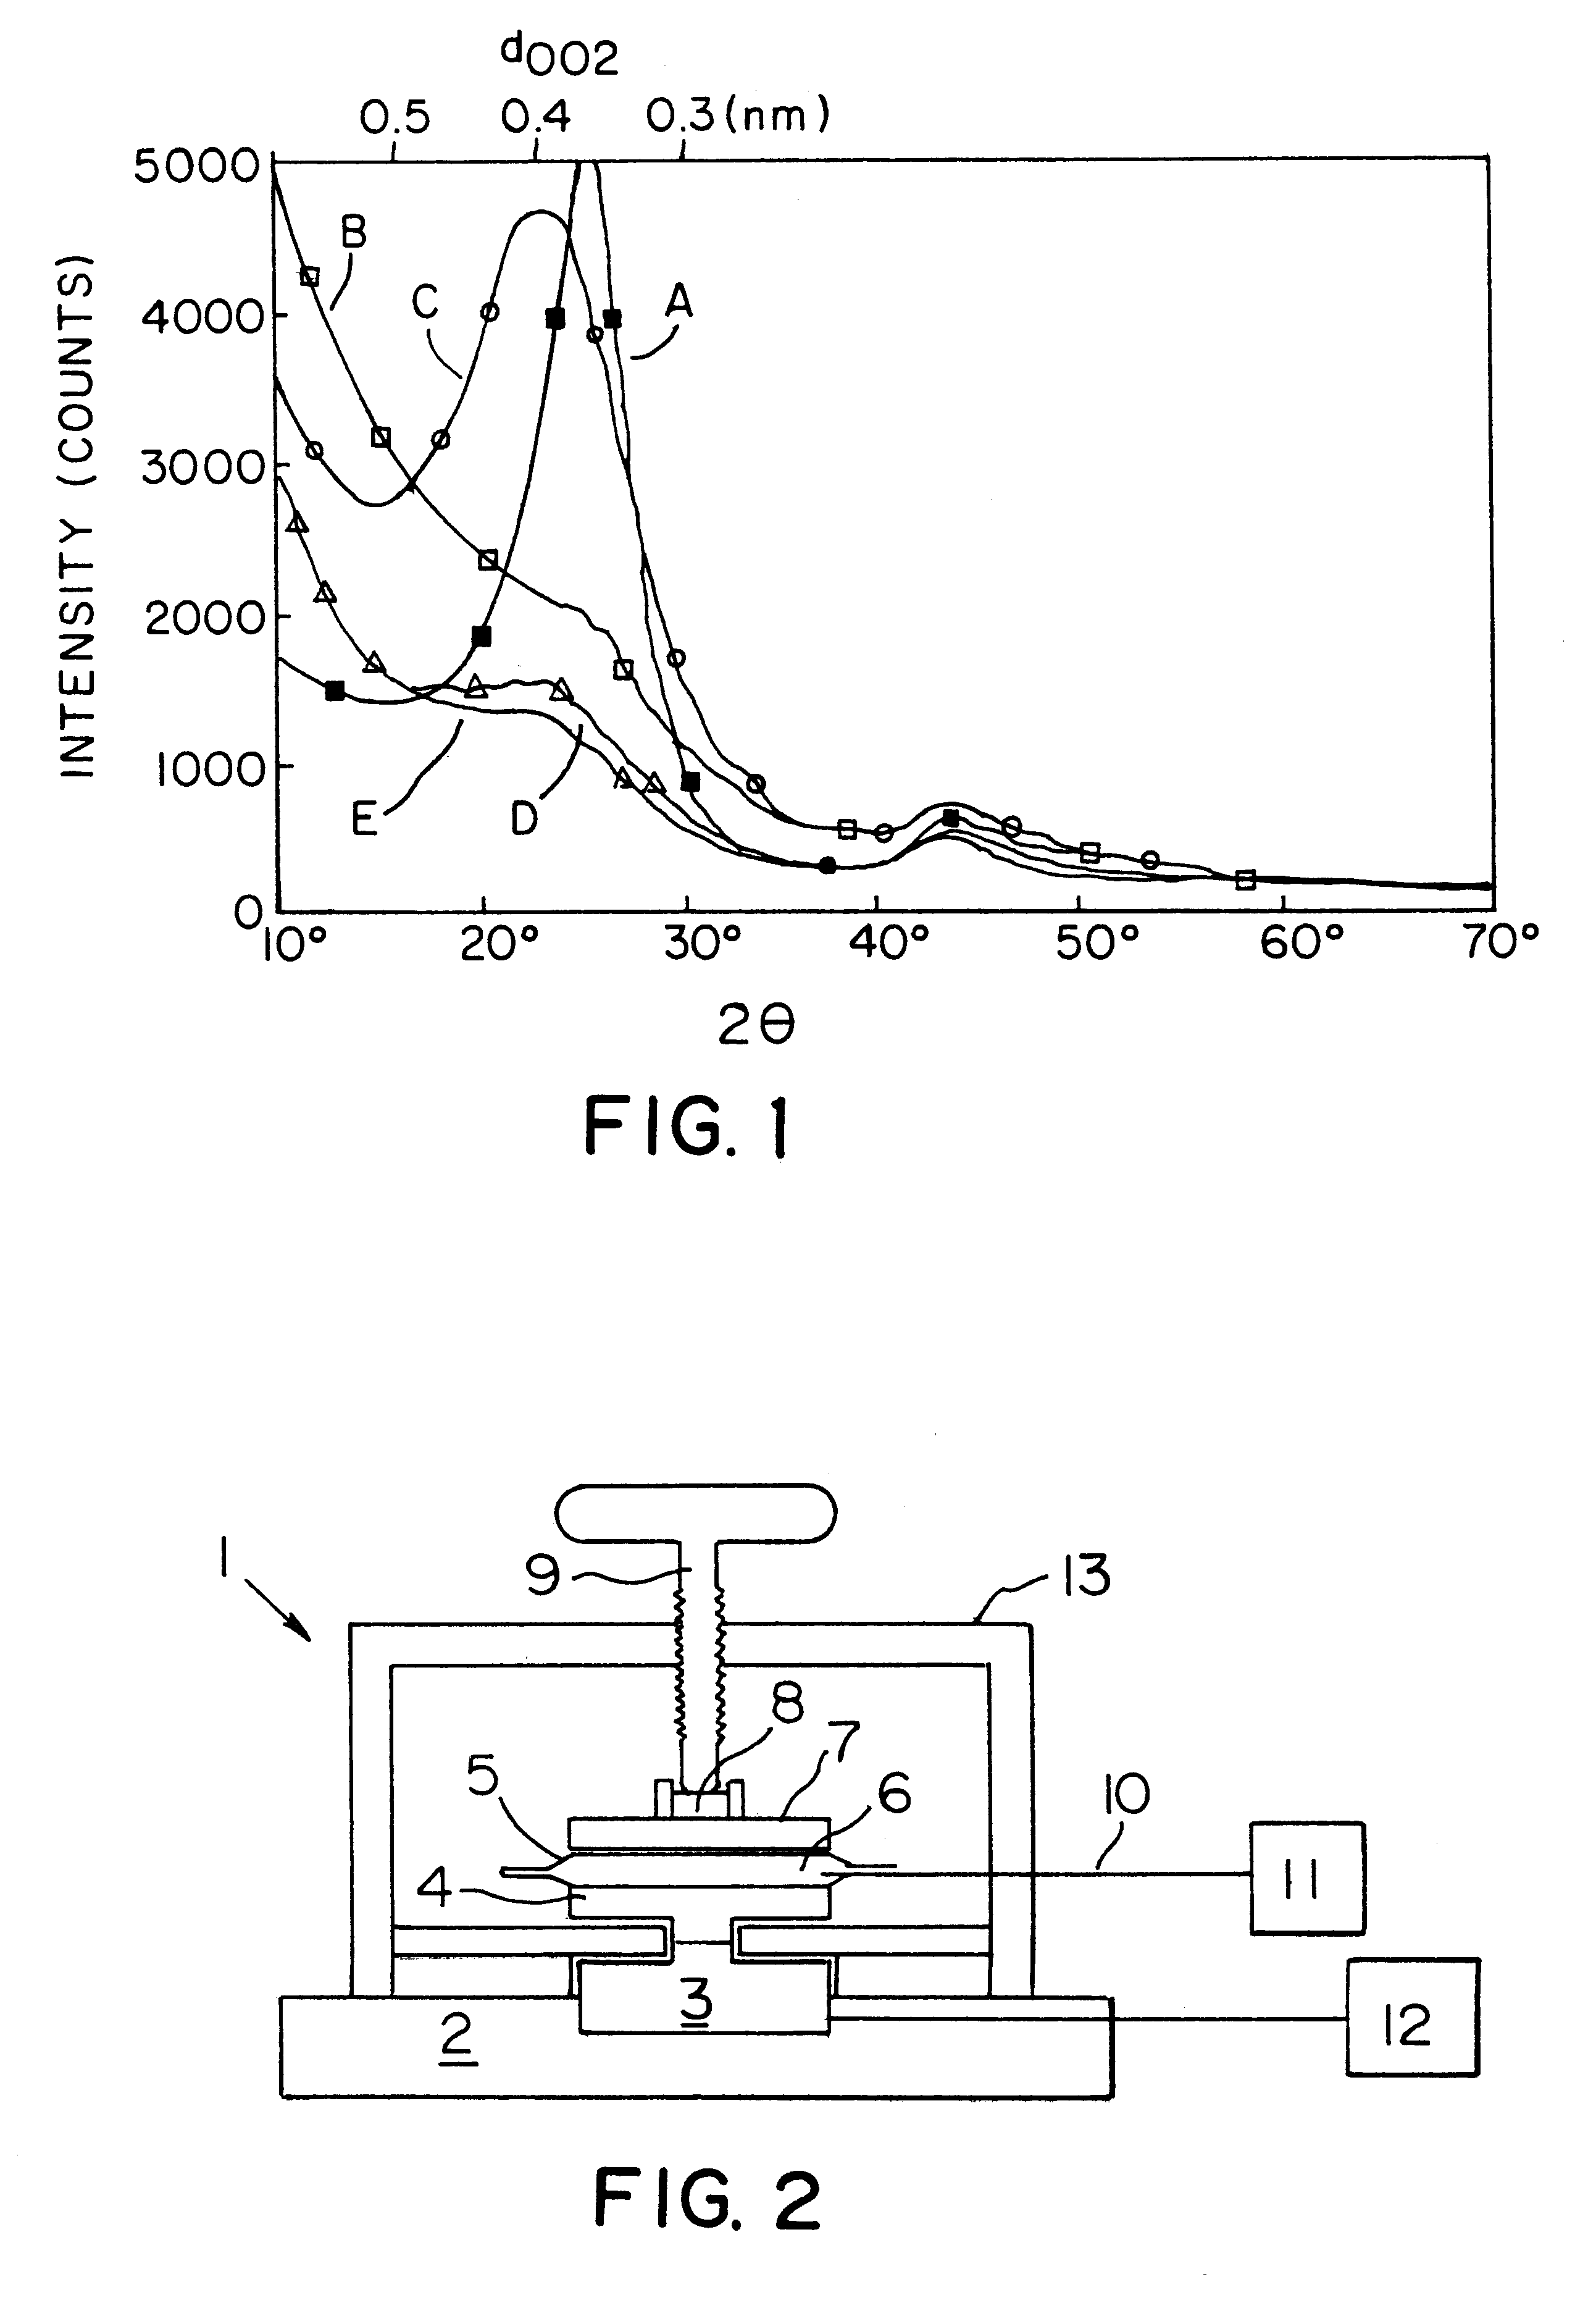 Carbon material for electric double layer capacitor, method of producing same, electric double layer capacitor and method of fabricating same